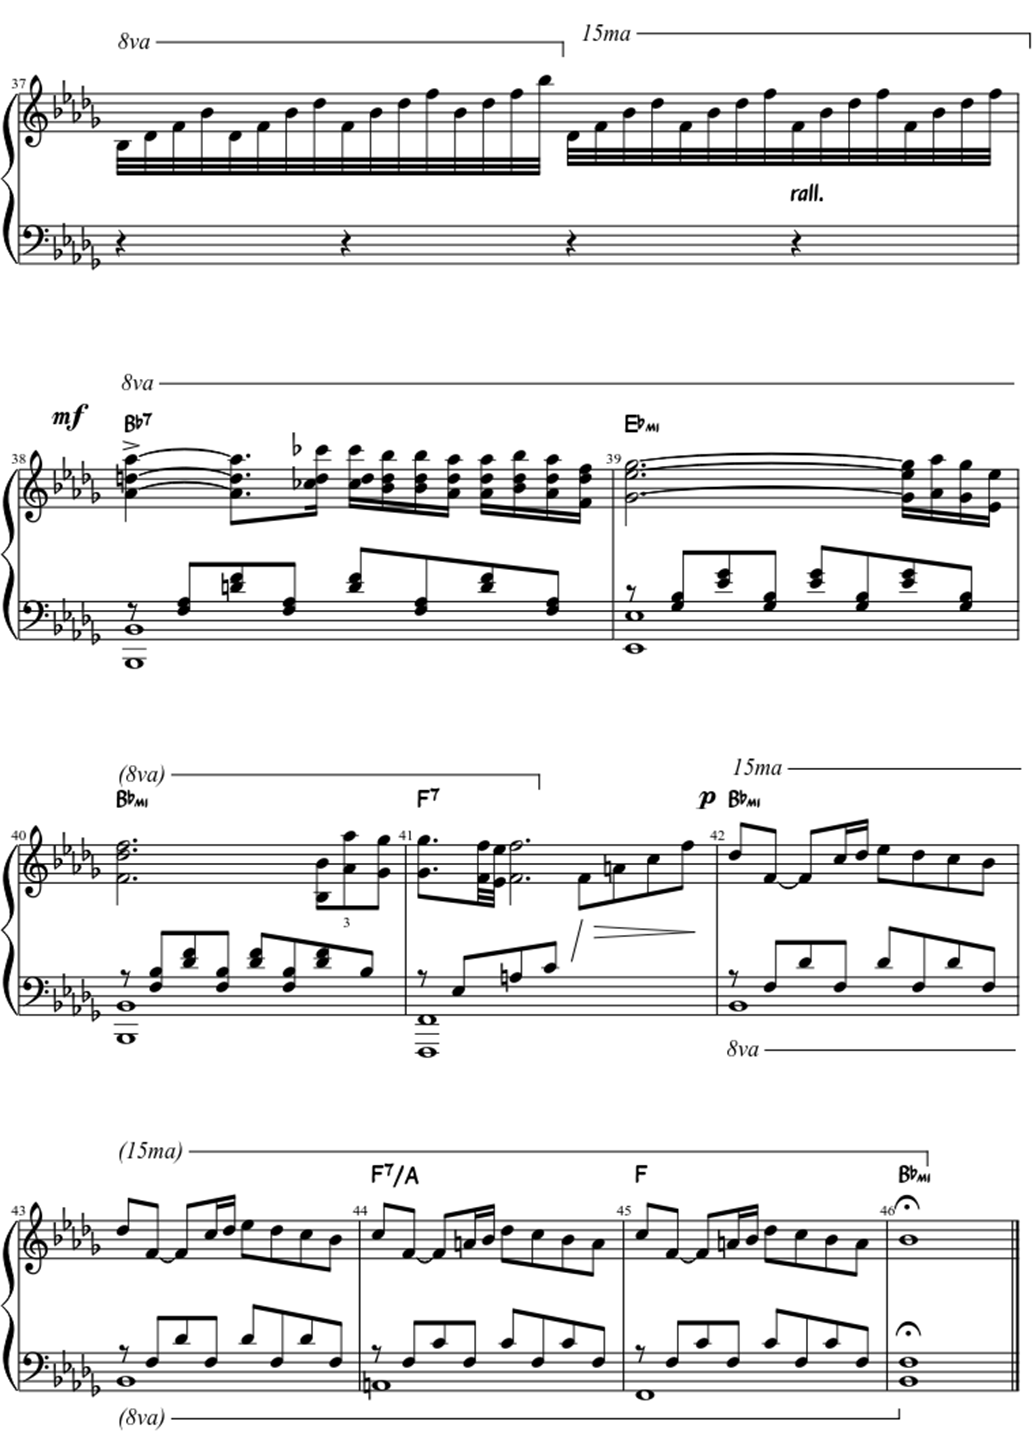 A comme amour sheet music notes 5